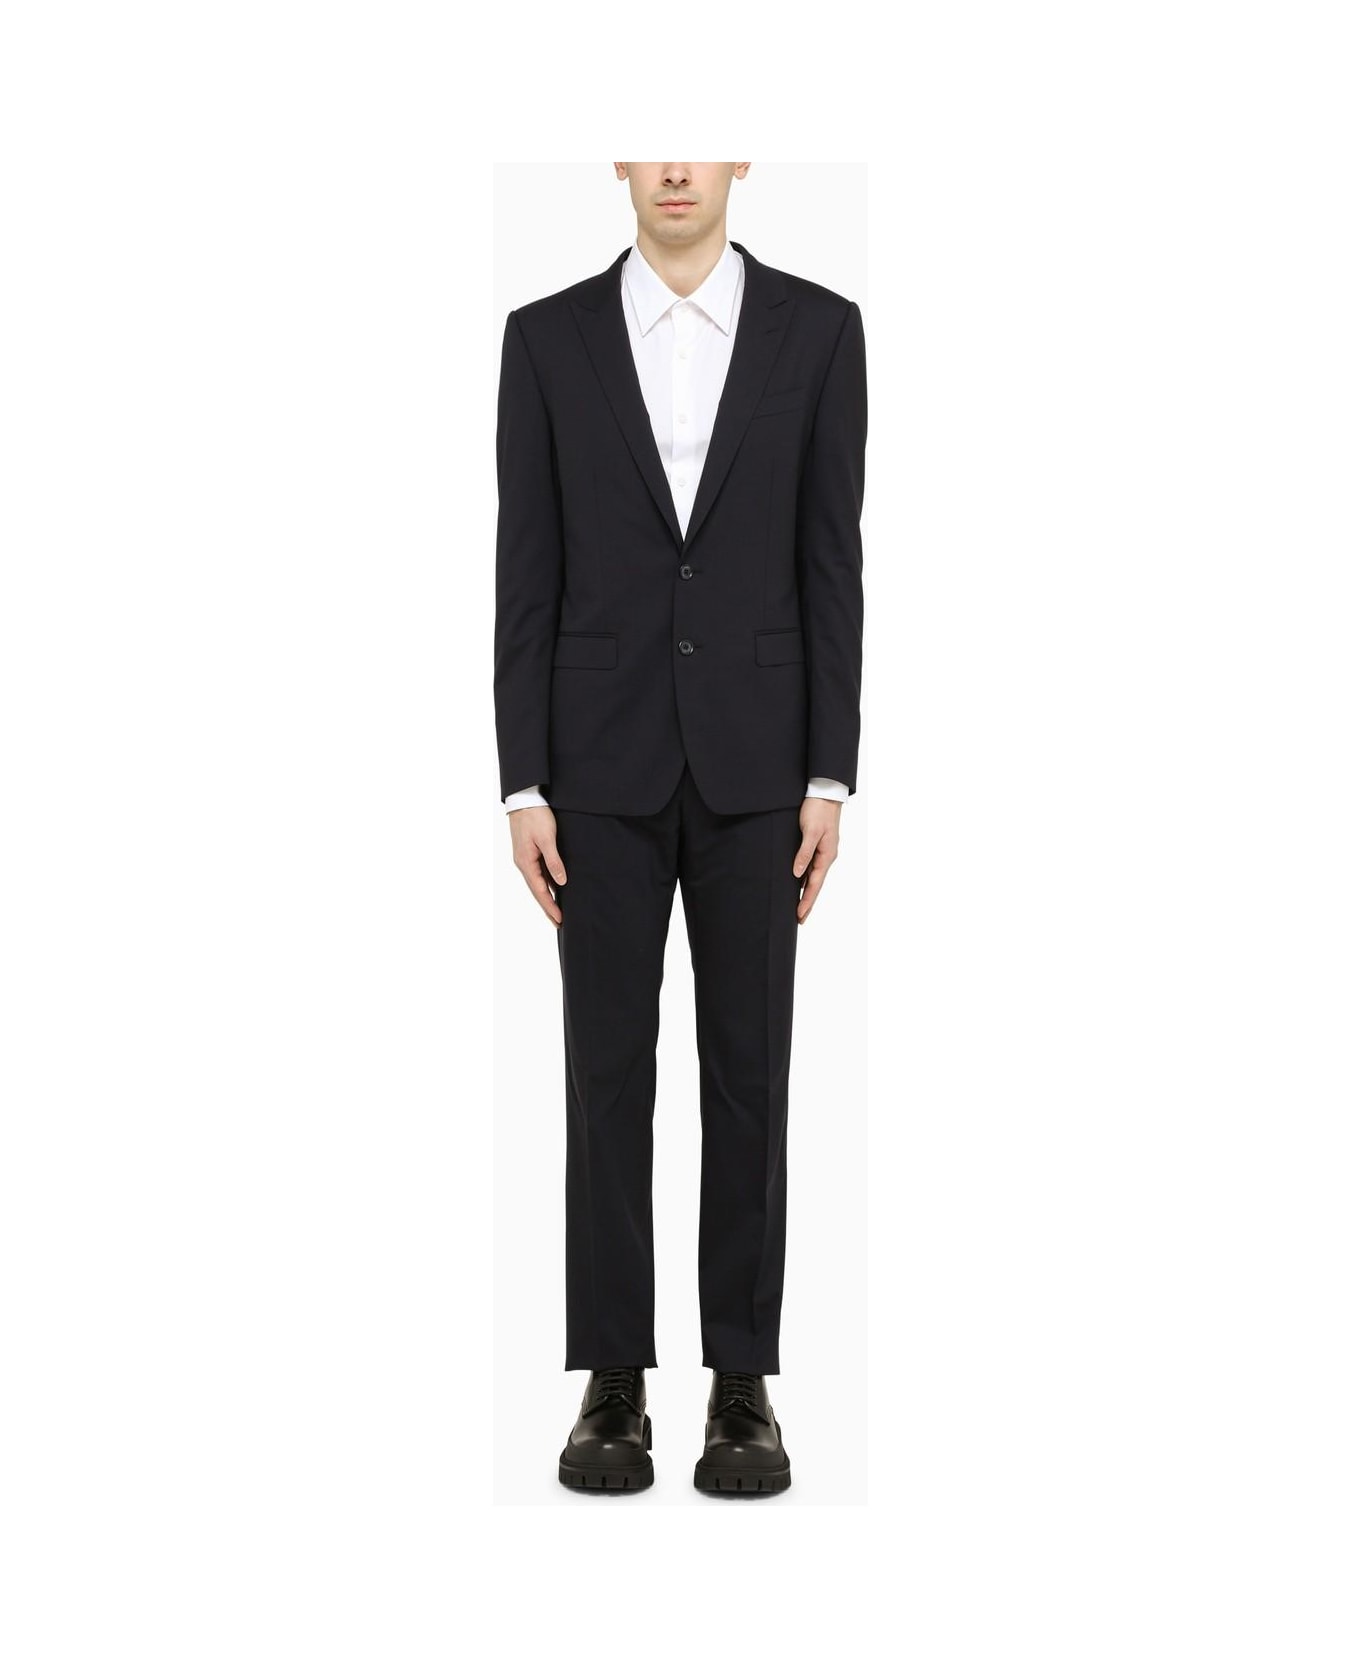 Dolce embroidered & Gabbana Dark Blue Single-breasted Suit - Blu